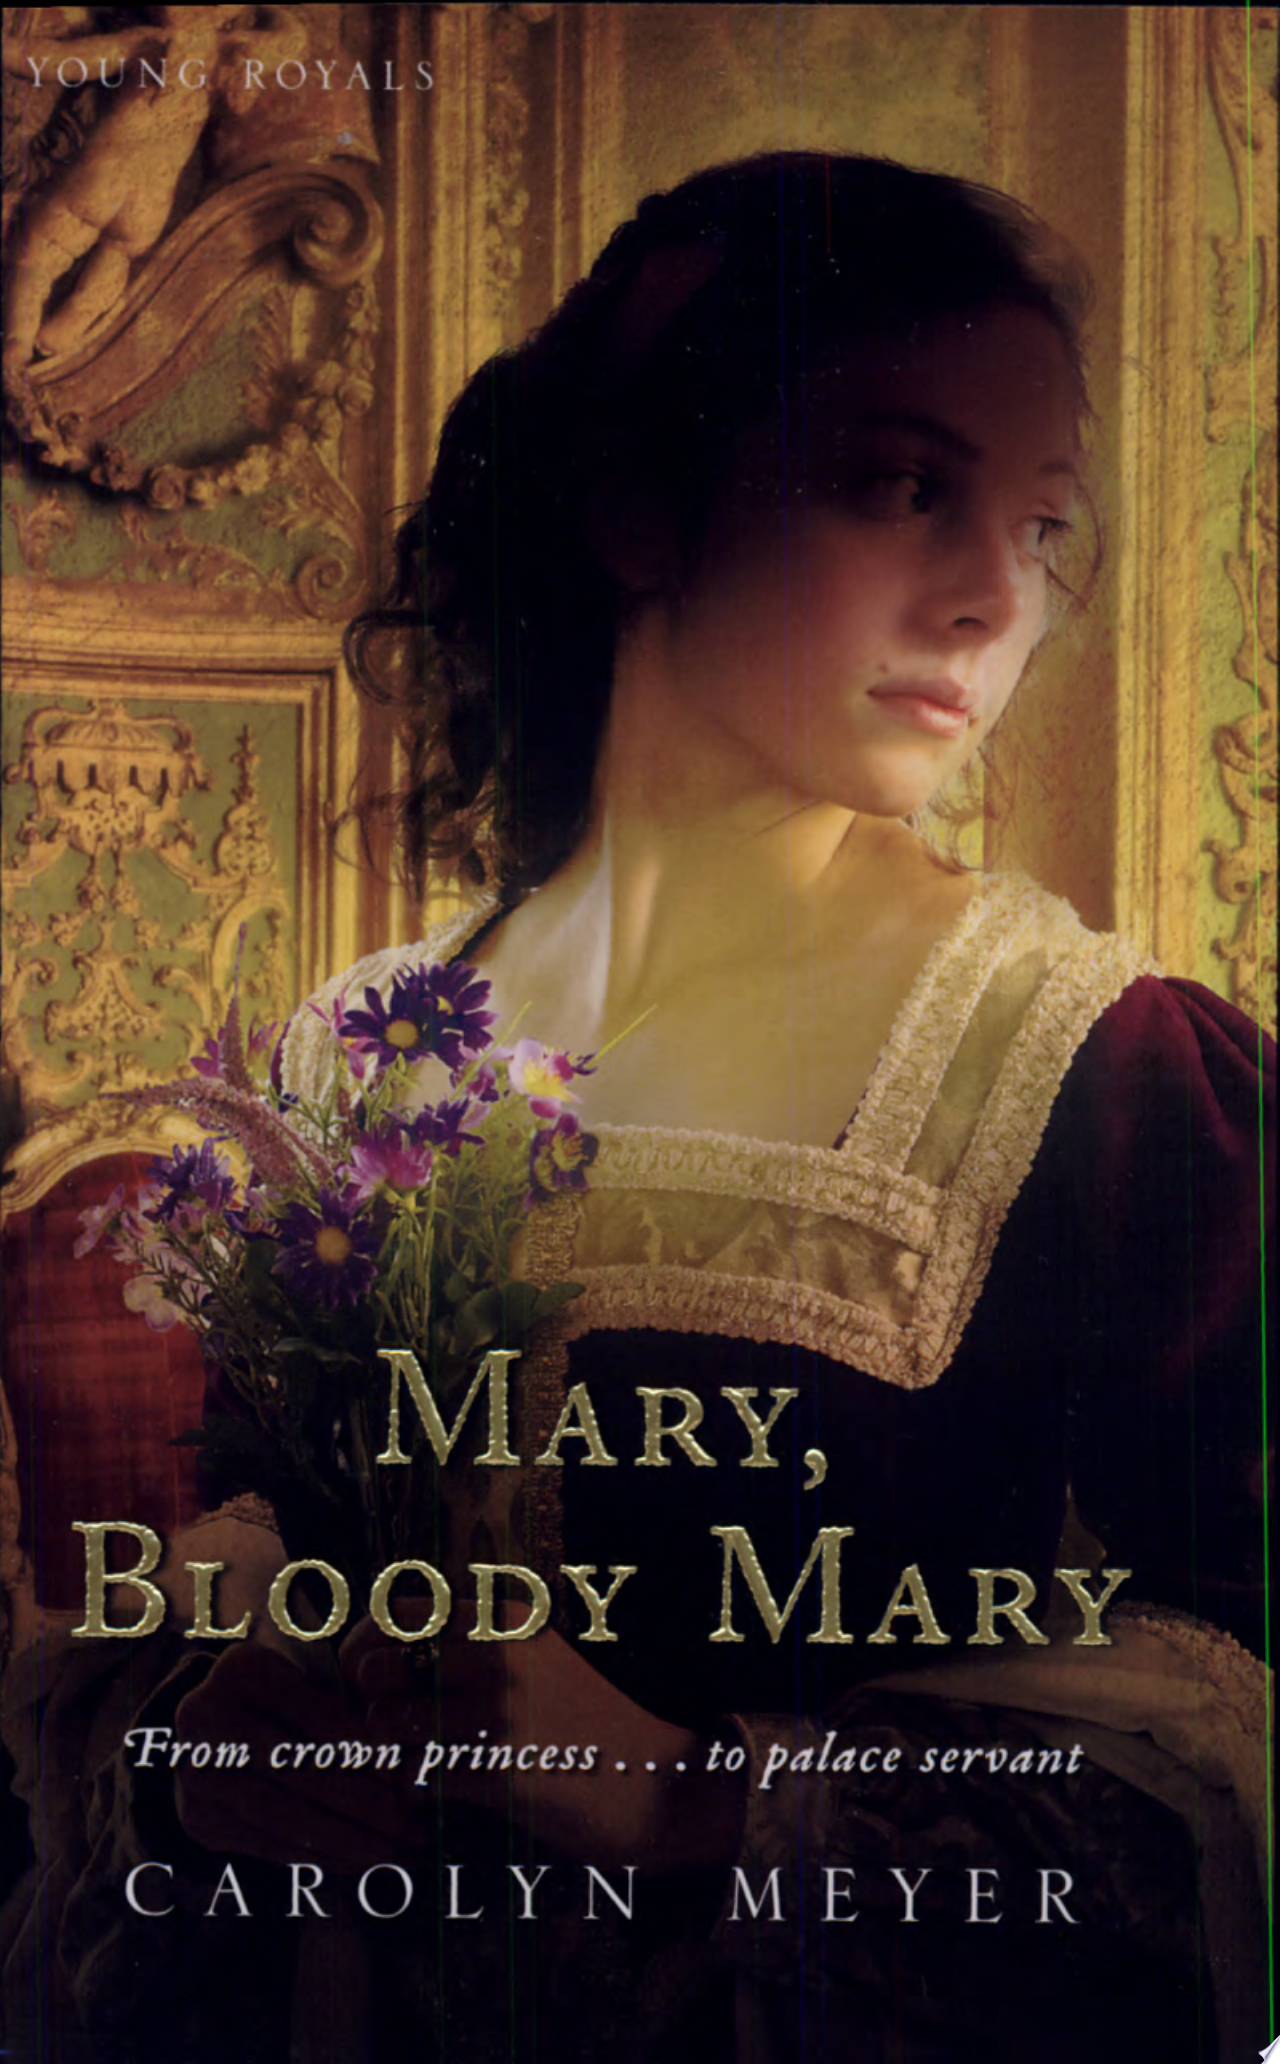 Image for "Mary, Bloody Mary"